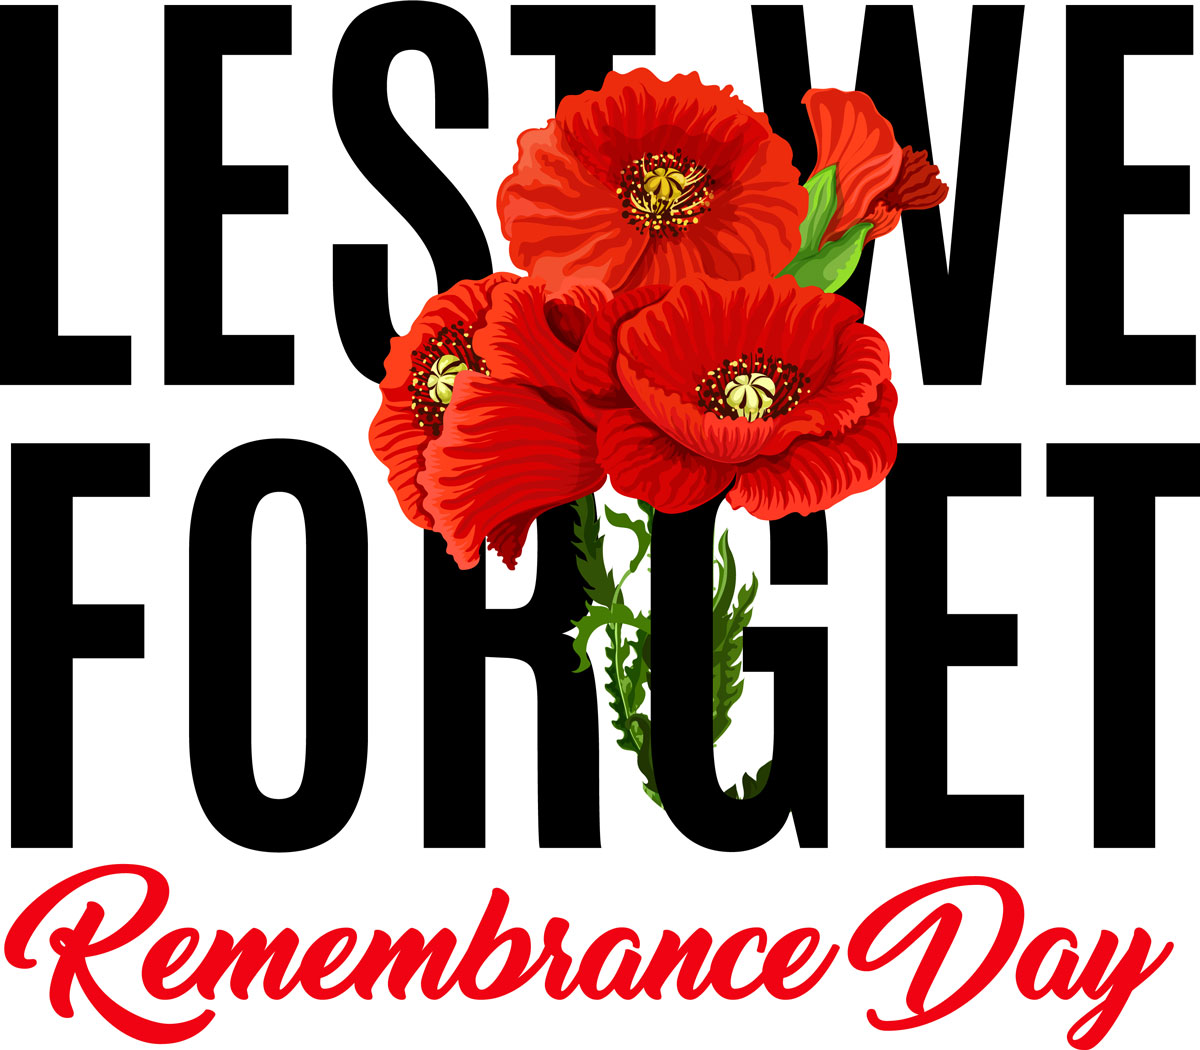 Remembrance-Day-vectorstock_20646017